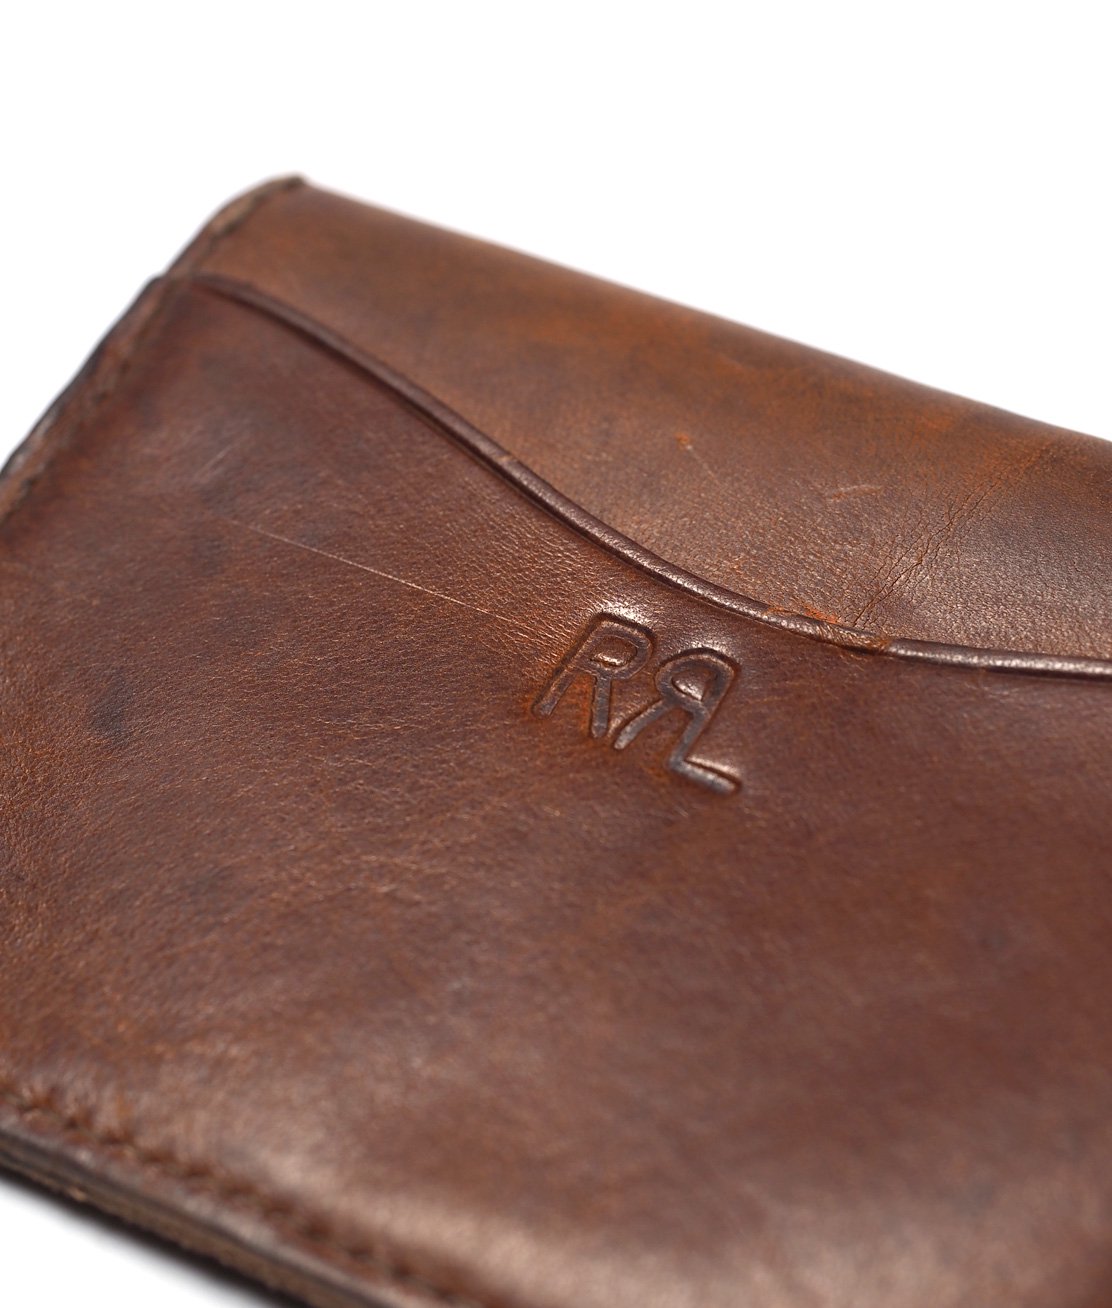 RRL】TUMBLED LEATHER CARD WALLET - DARK BROWN カードケース